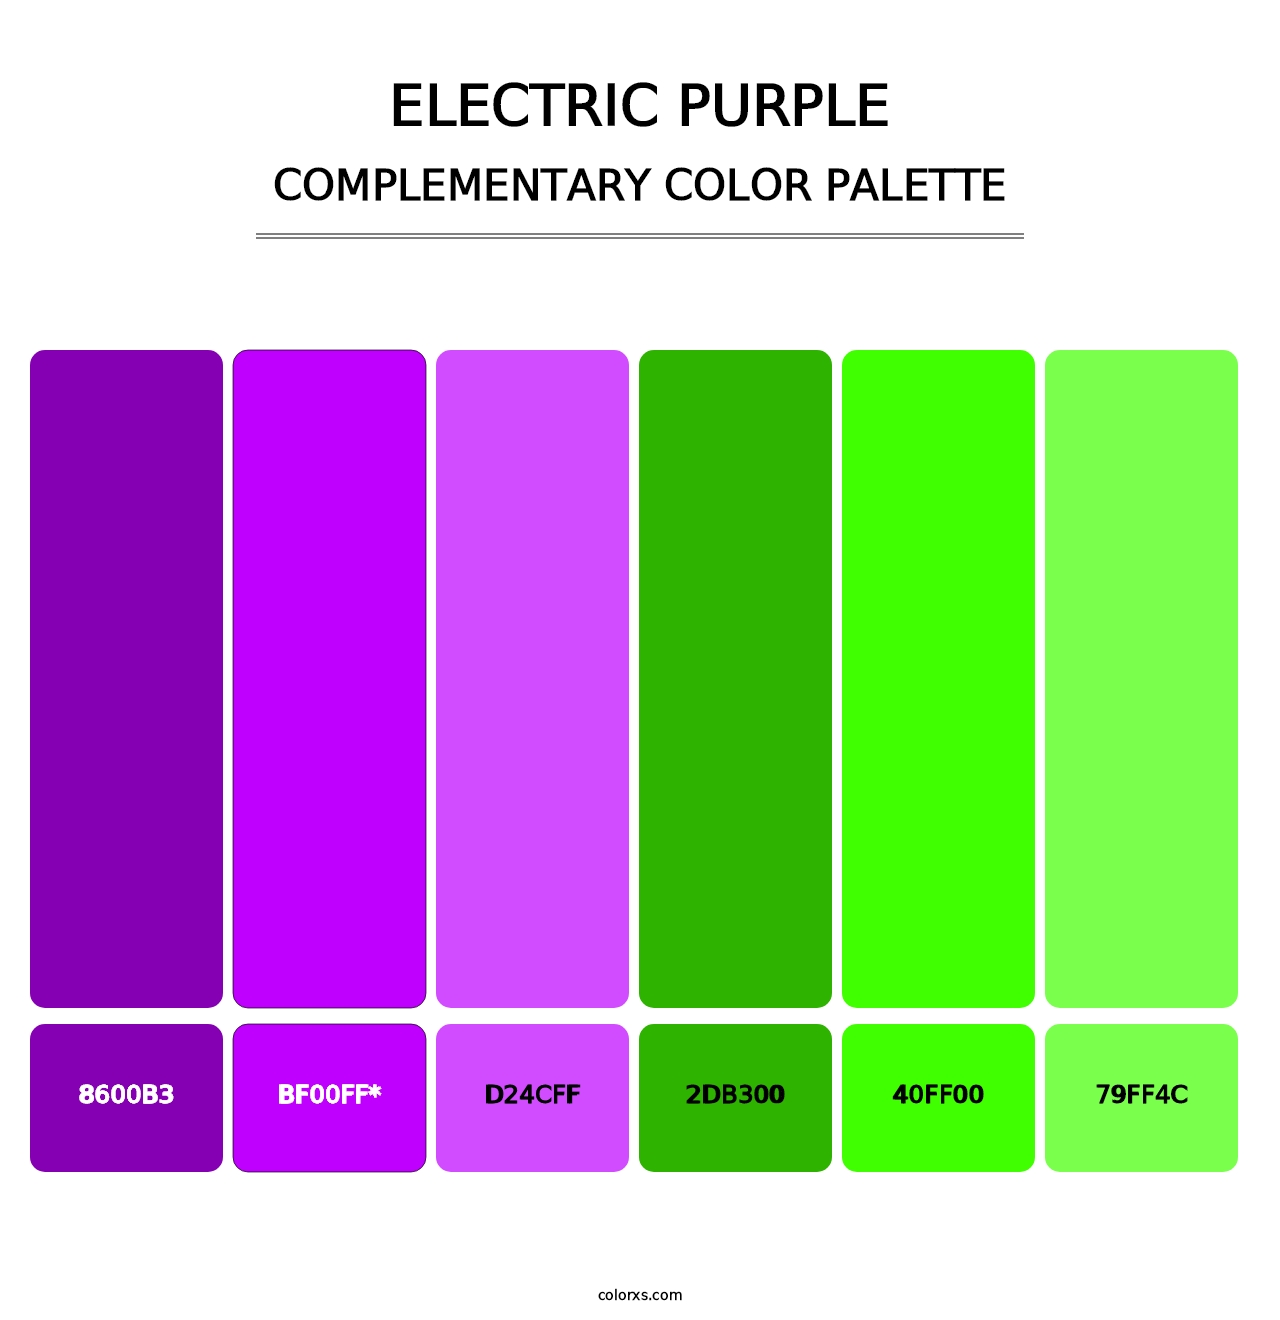 Electric Purple - Complementary Color Palette